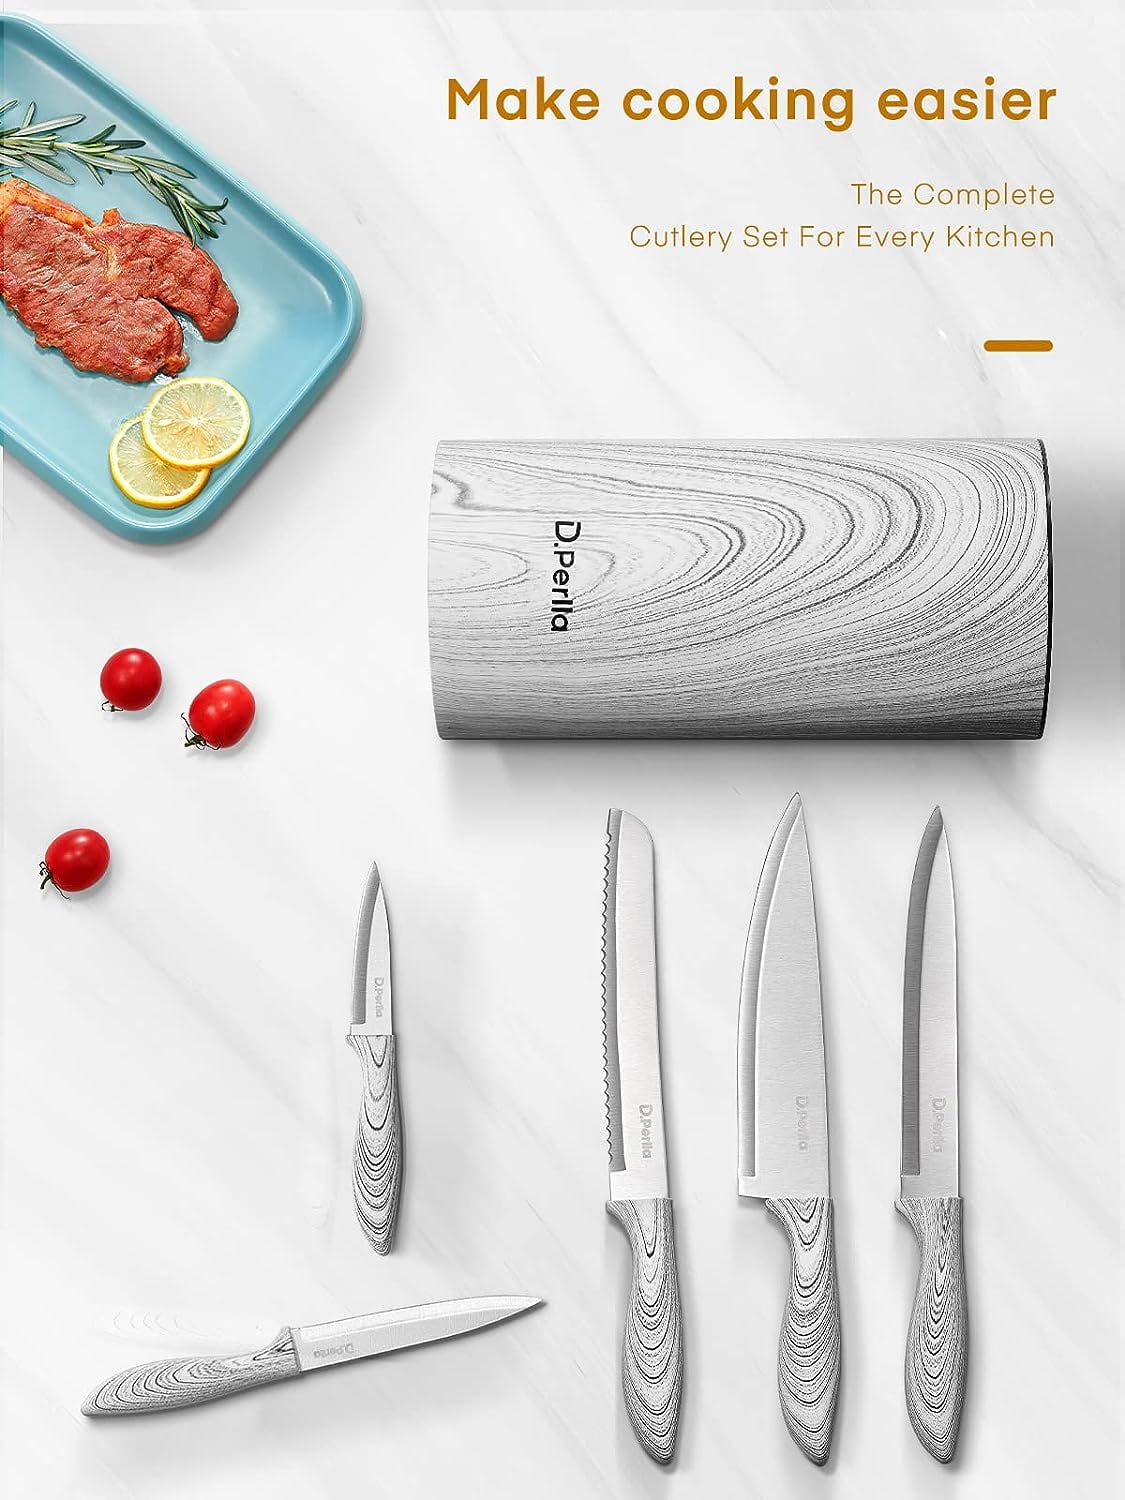 D.Perlla - Knife Set (2 stores) see best prices now »